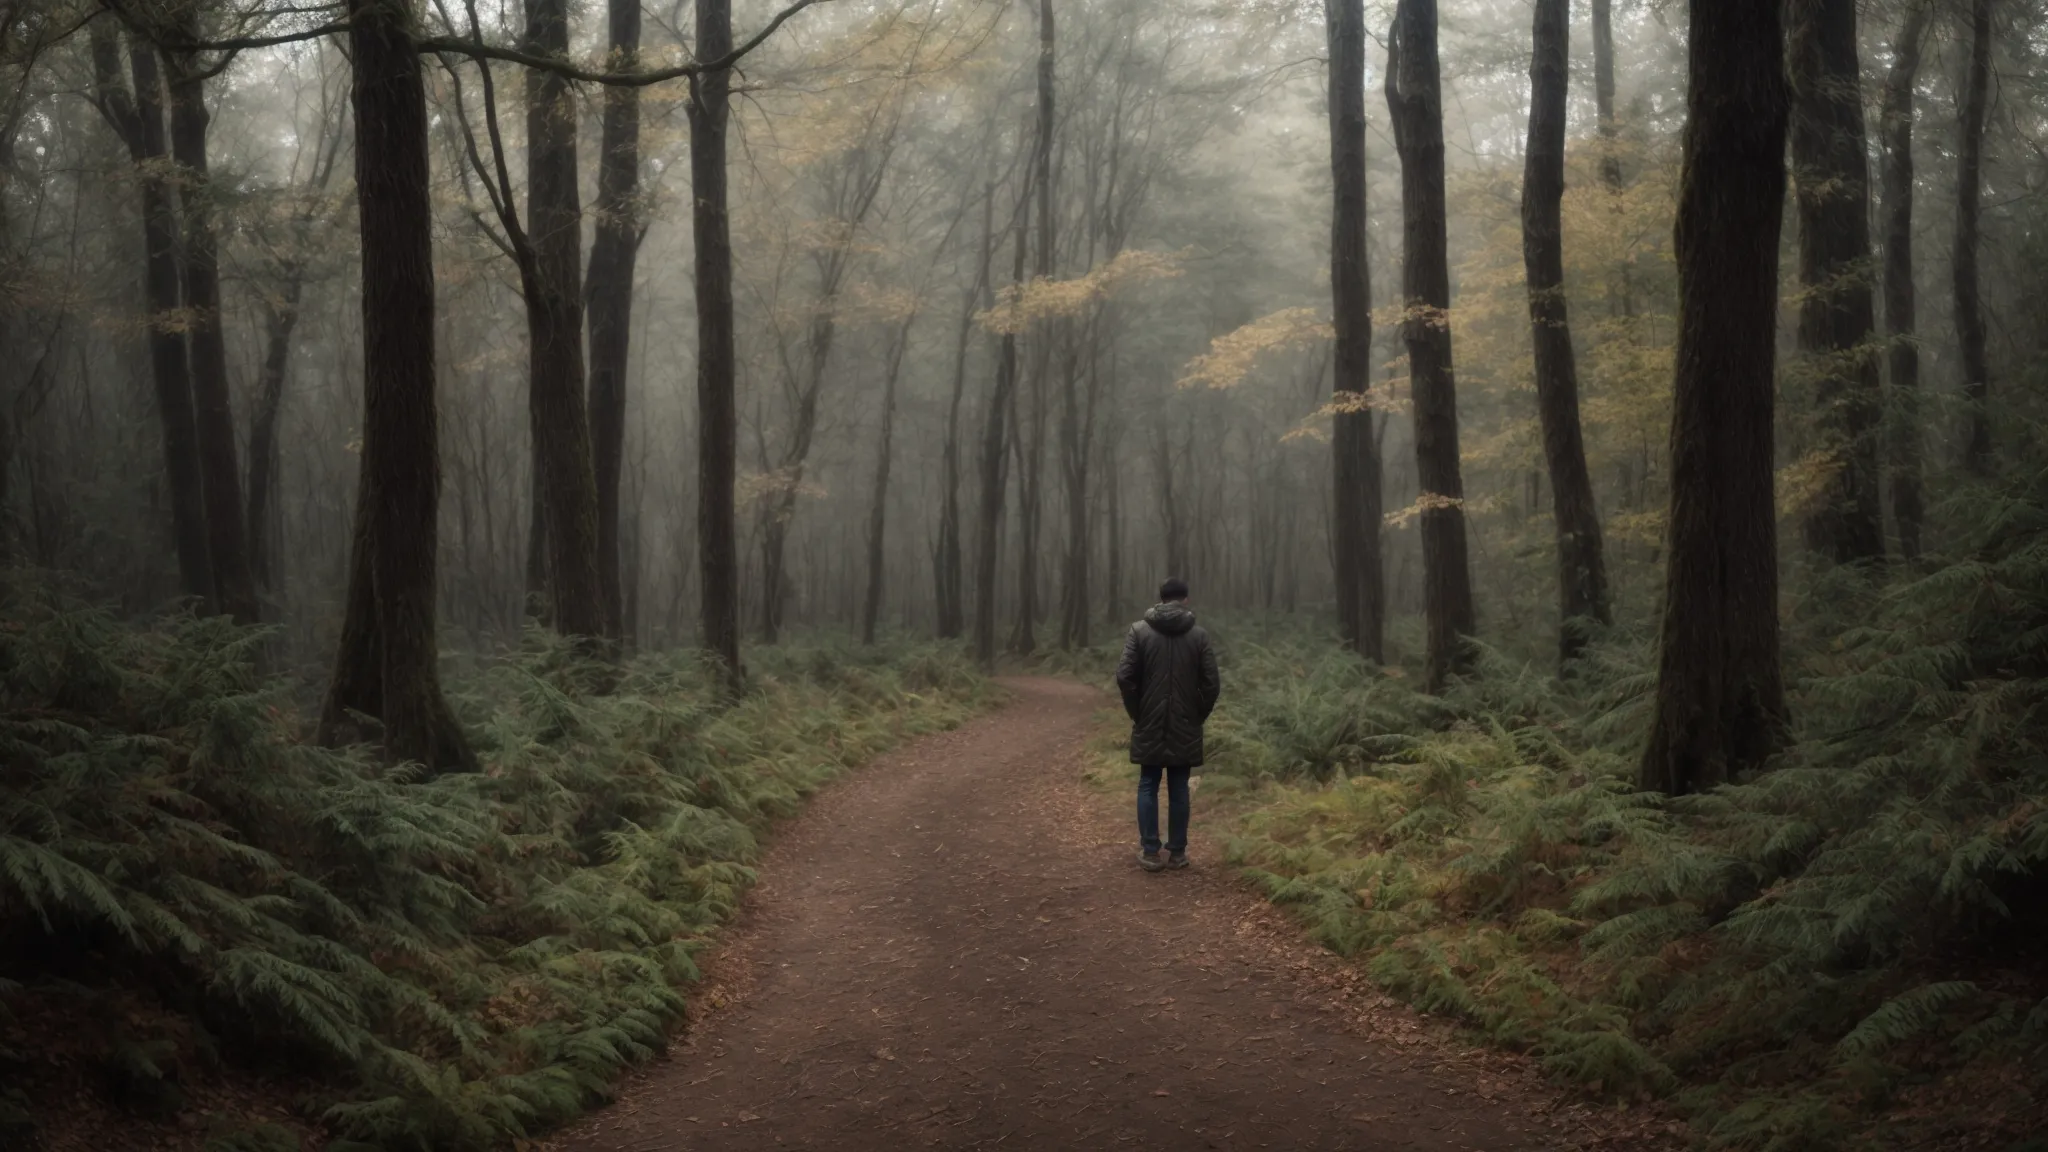 a person standing at a forked path in a forest, contemplating which direction to take.